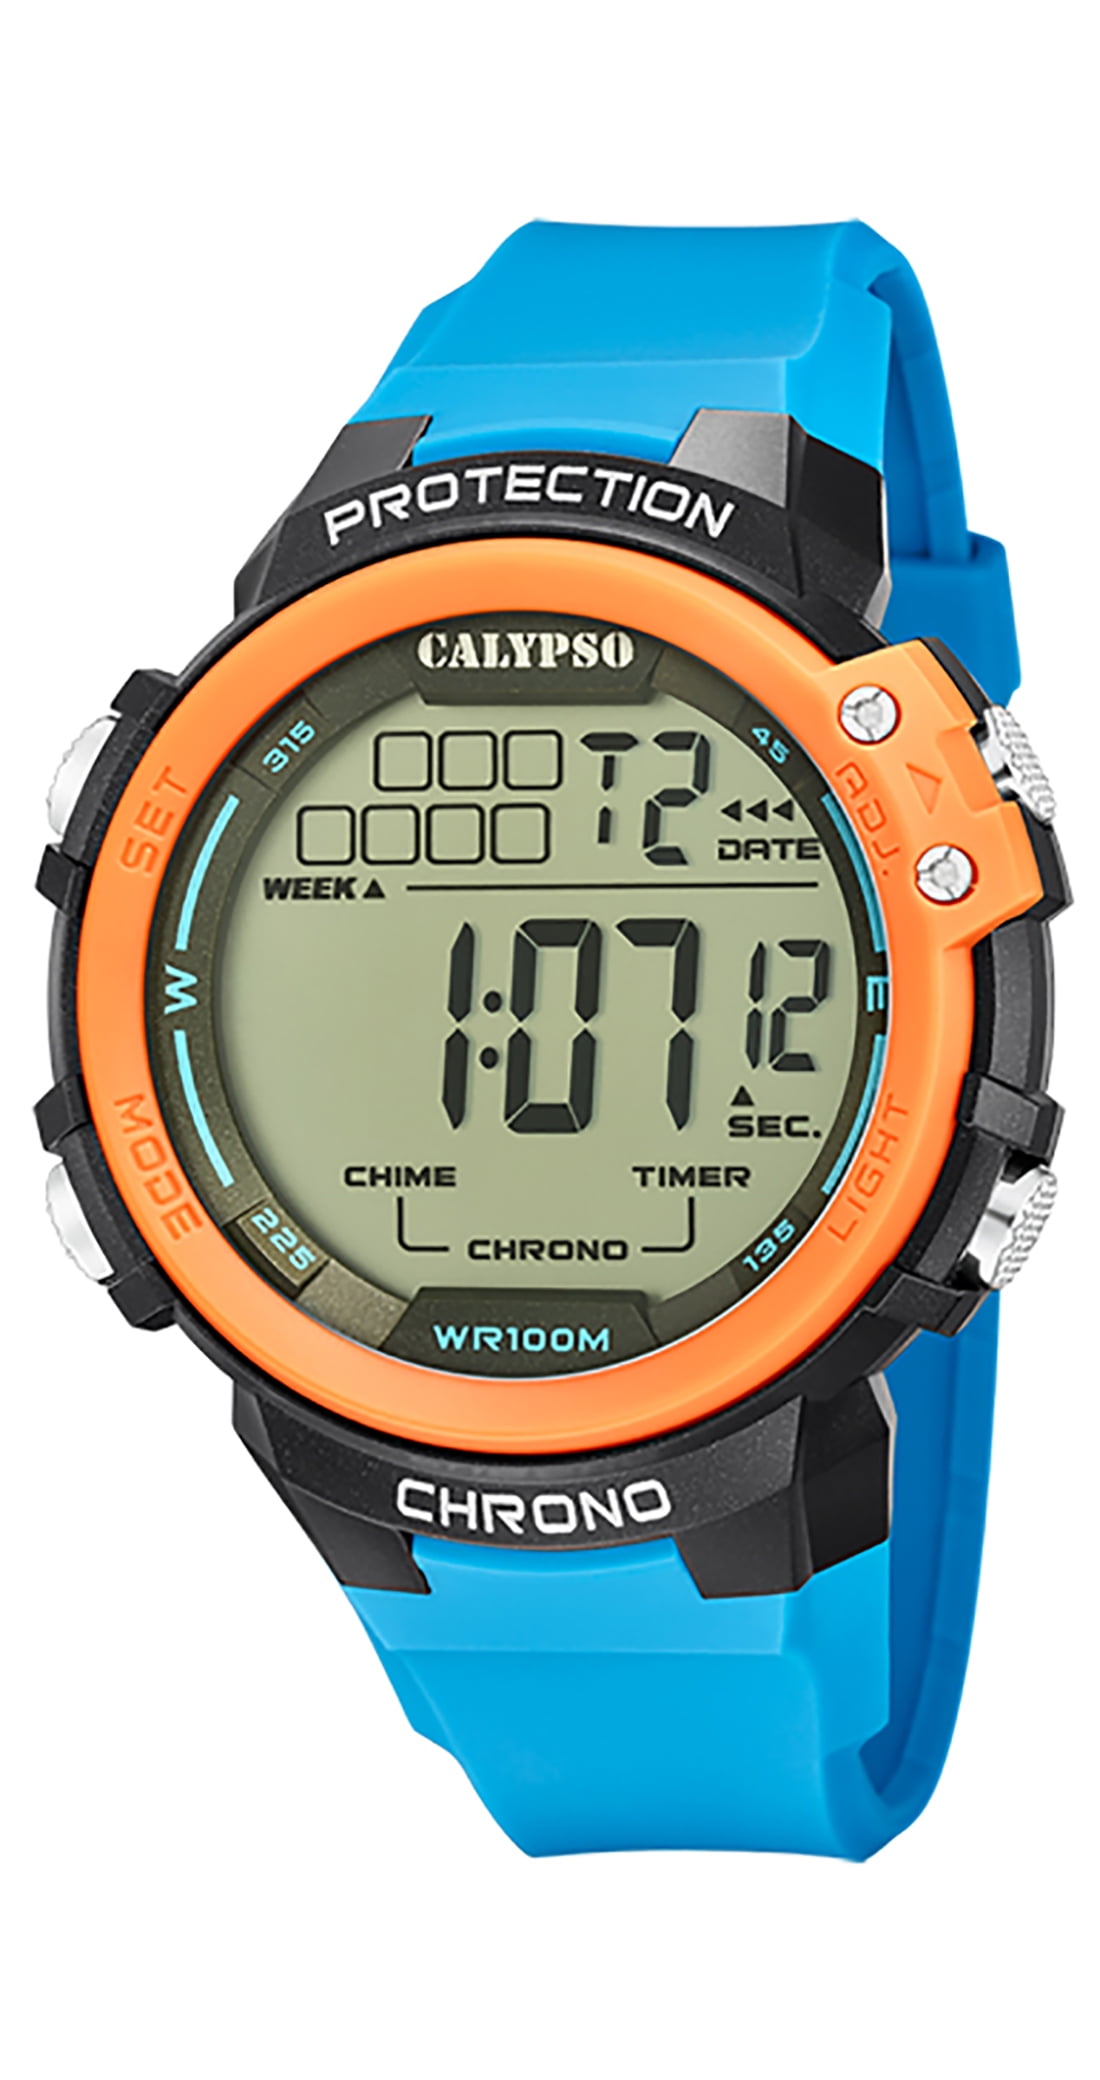 Calypso 56mm Watch, Rubber Digital Date Timer, Chime Day Hourly Strap, Dual Calendar, Time, Light, Chronograph, / Mens Sports